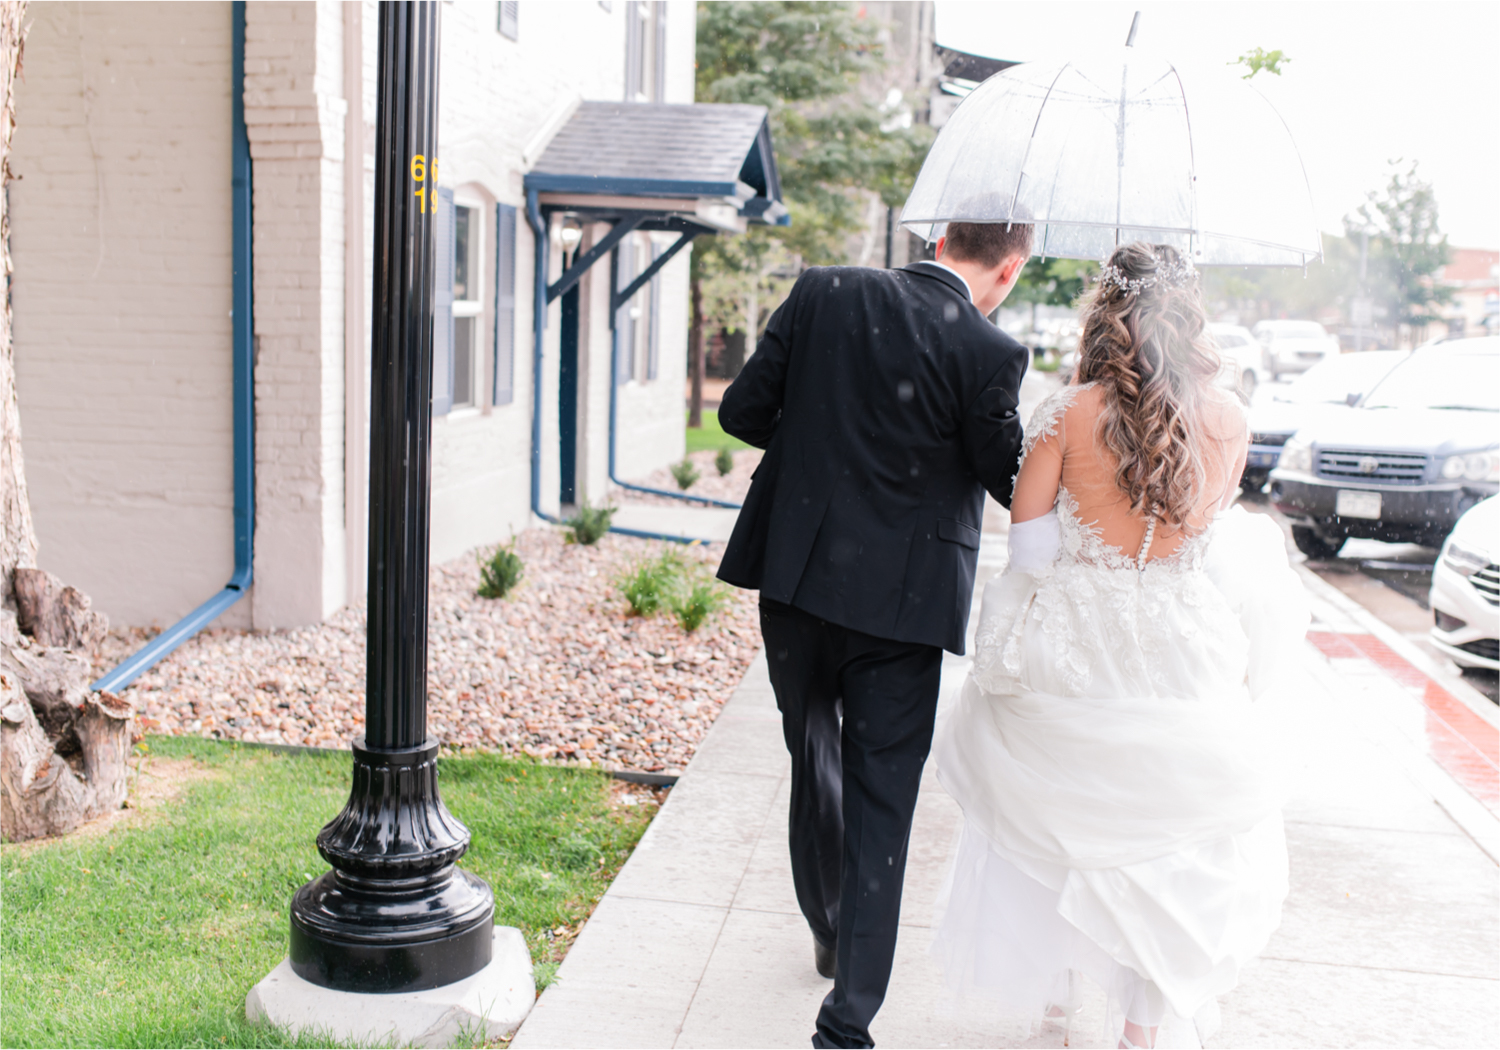 Romantic and Rustic Wedding at The Mill in Windsor | Britni Girard Photography | Colorado based wedding photography and videography team | Bride and groom in rain